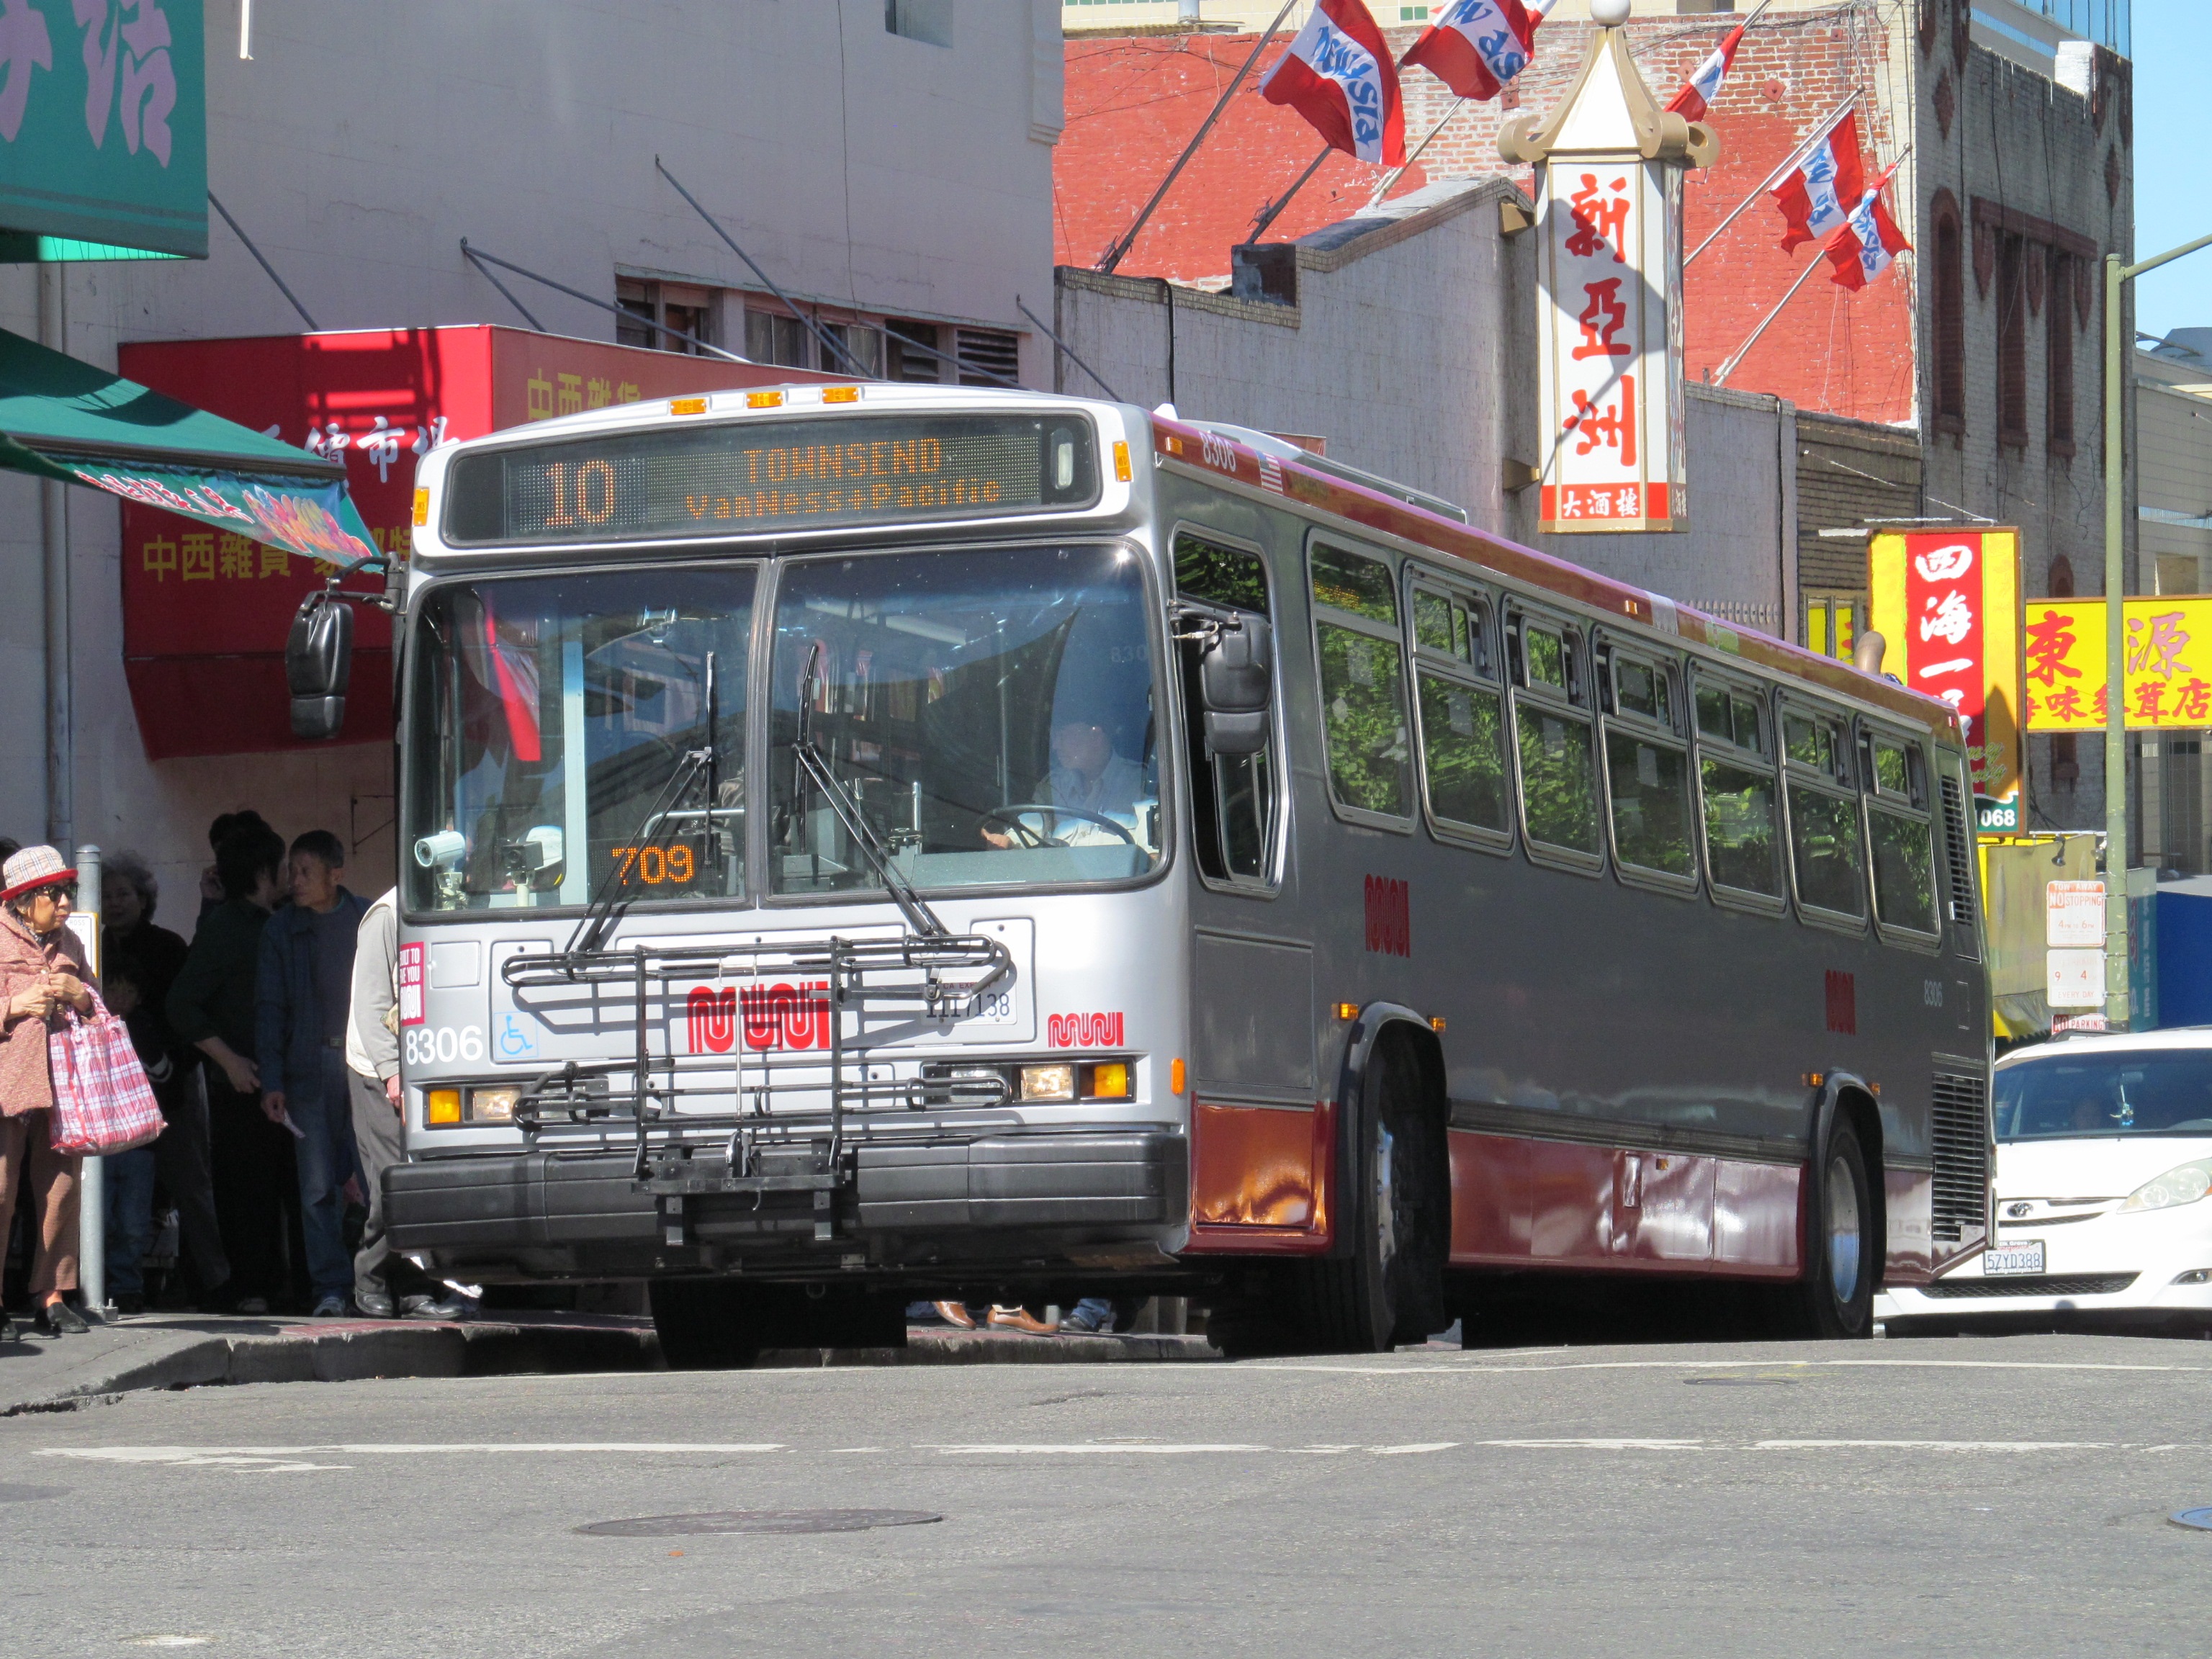 10 Townsend silver and red Muni bus waits at the curb for passengers to board with colorful neighborhood banners and signs in the background.